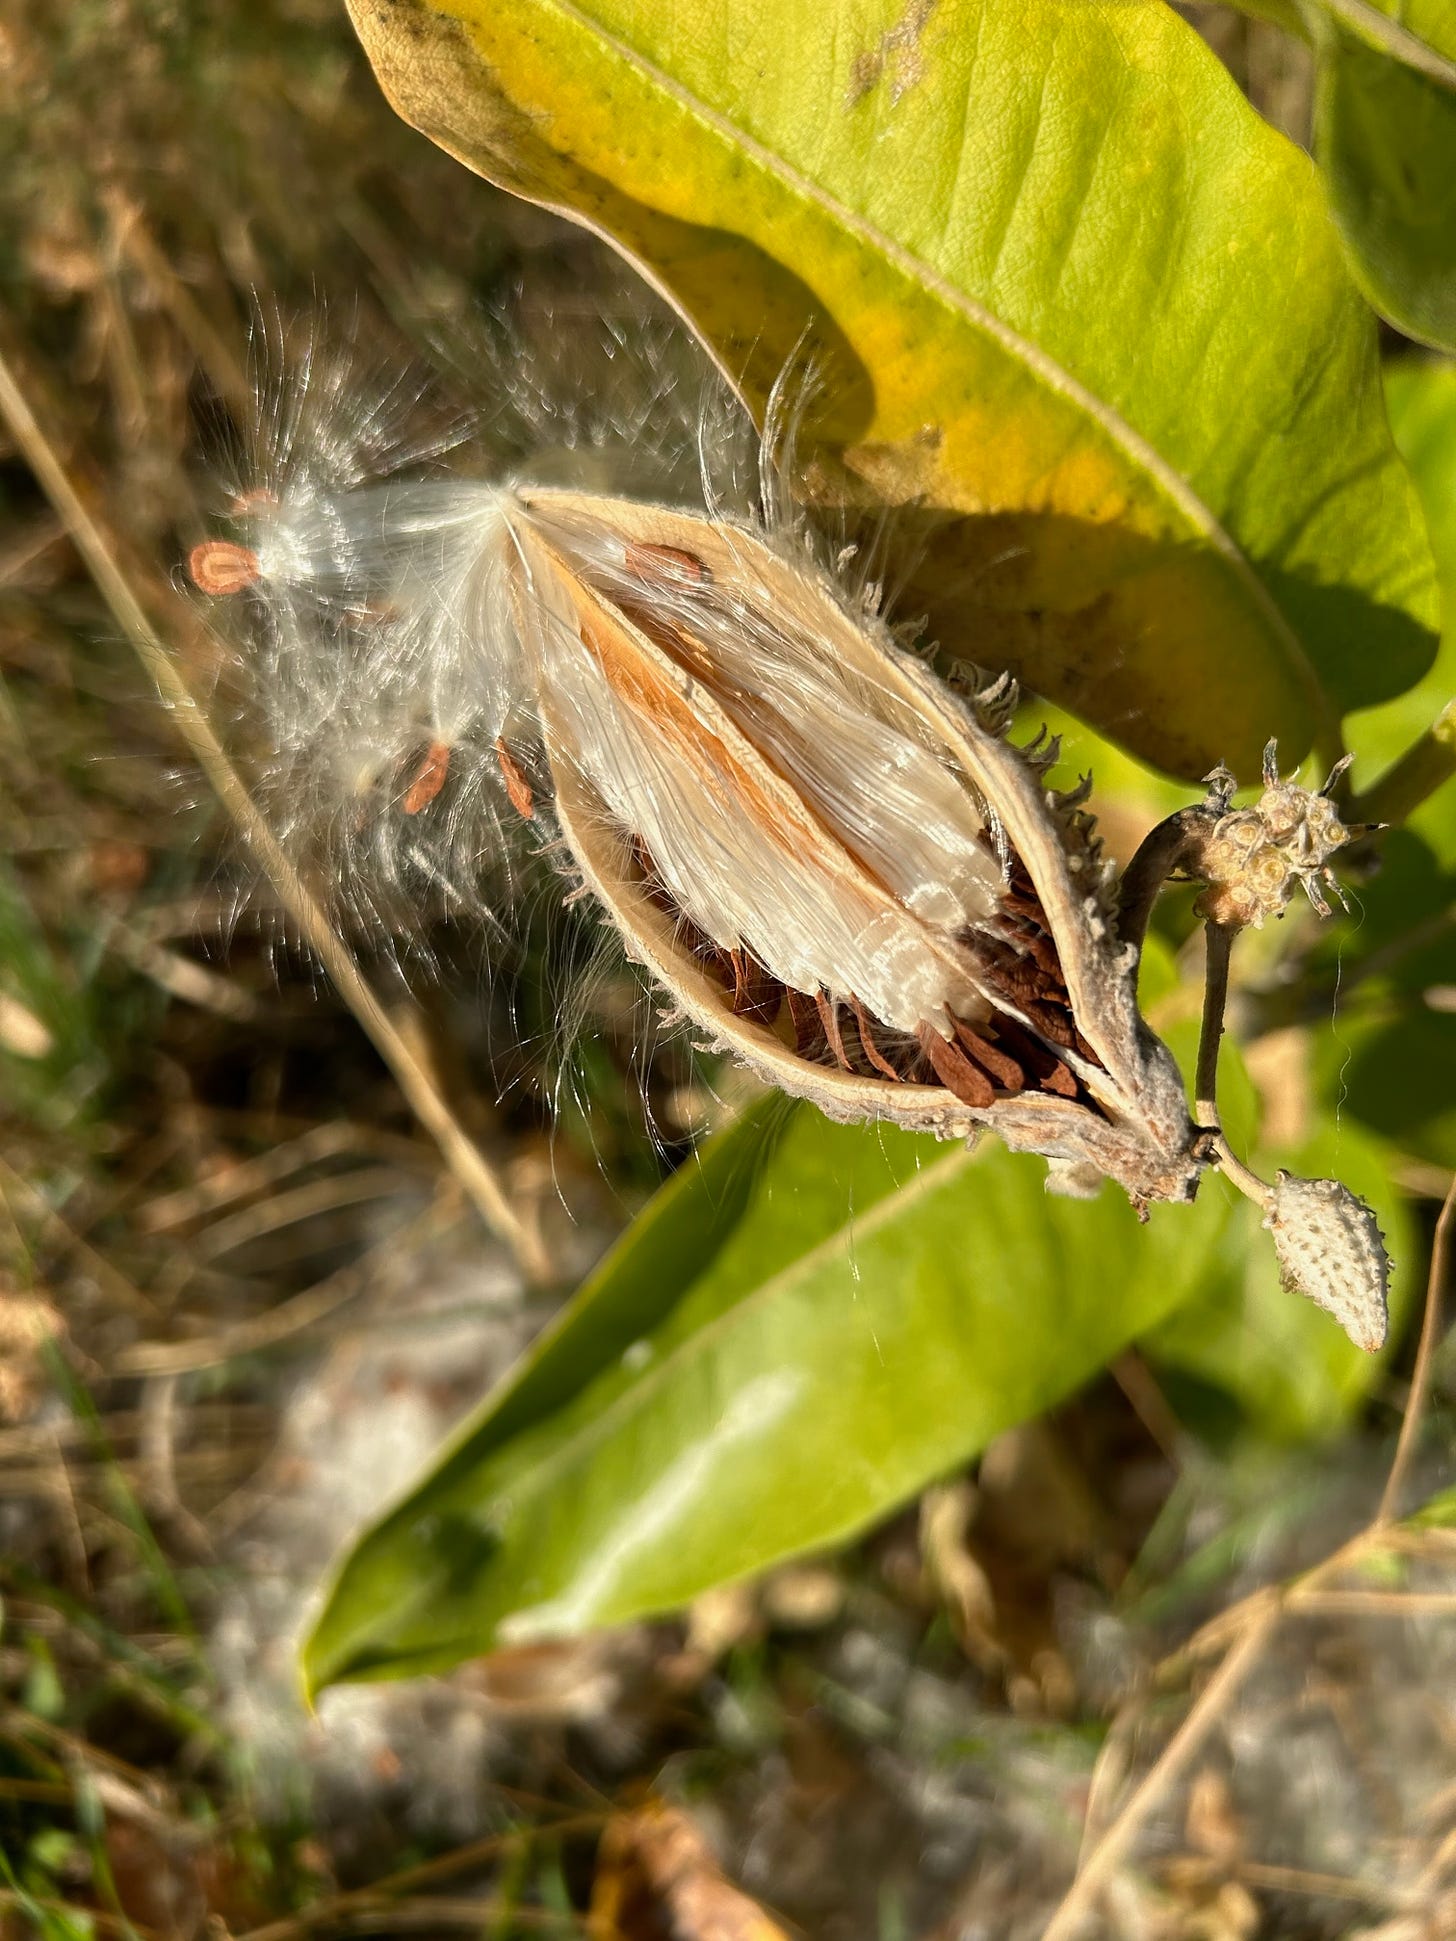 A closeup of an open milkweed pod. Neat rows of seeds can be seen, with just a few at the top beginning to let go. 